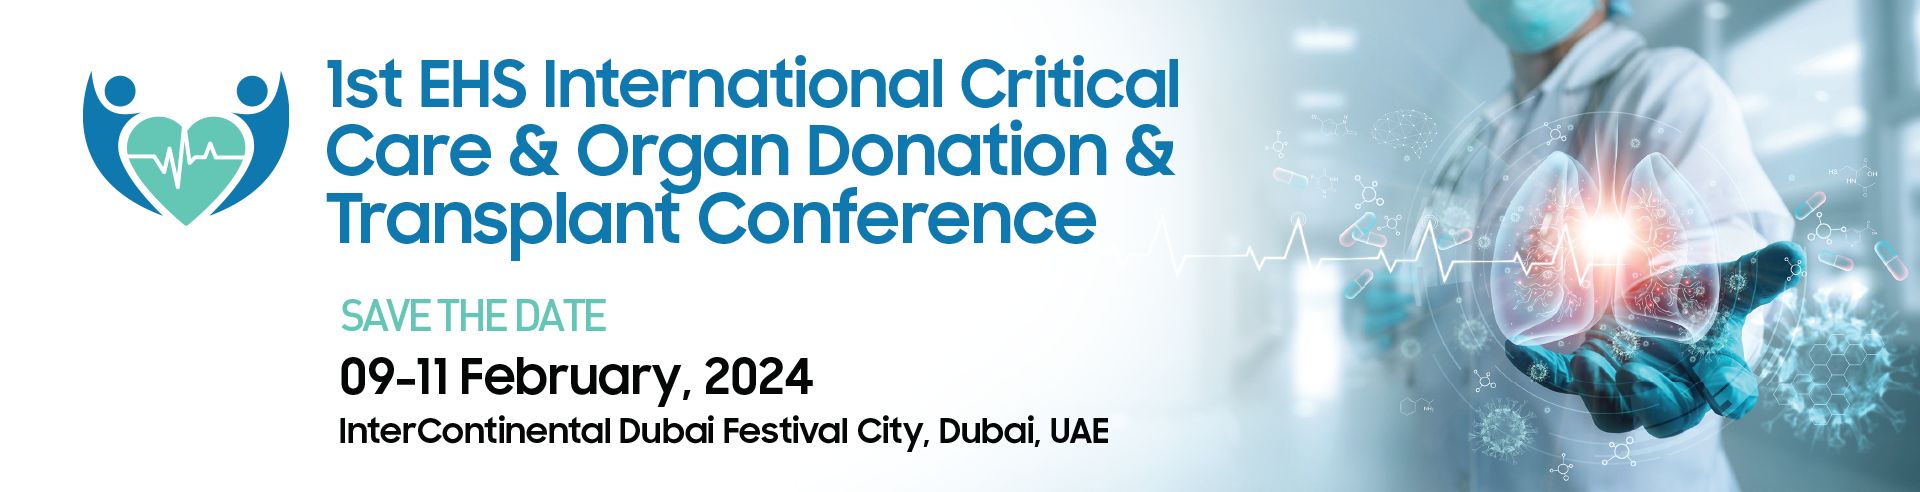 1st EHS International Critical Care and Organ Donation and Transplant Conference, Dubai, United Arab Emirates